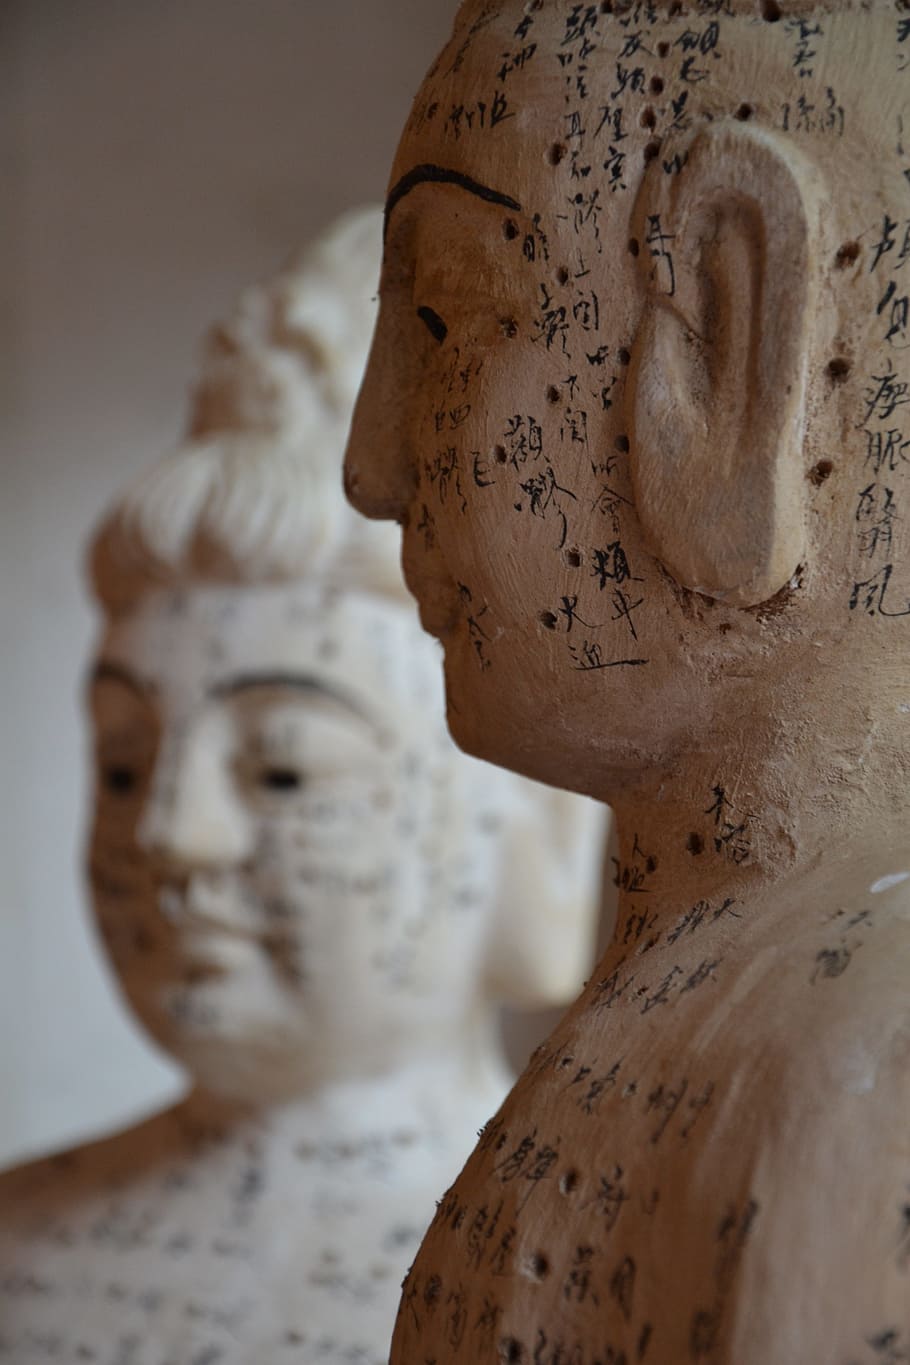 two statues with kanji script, acupuncture, tcm, chinese medicine